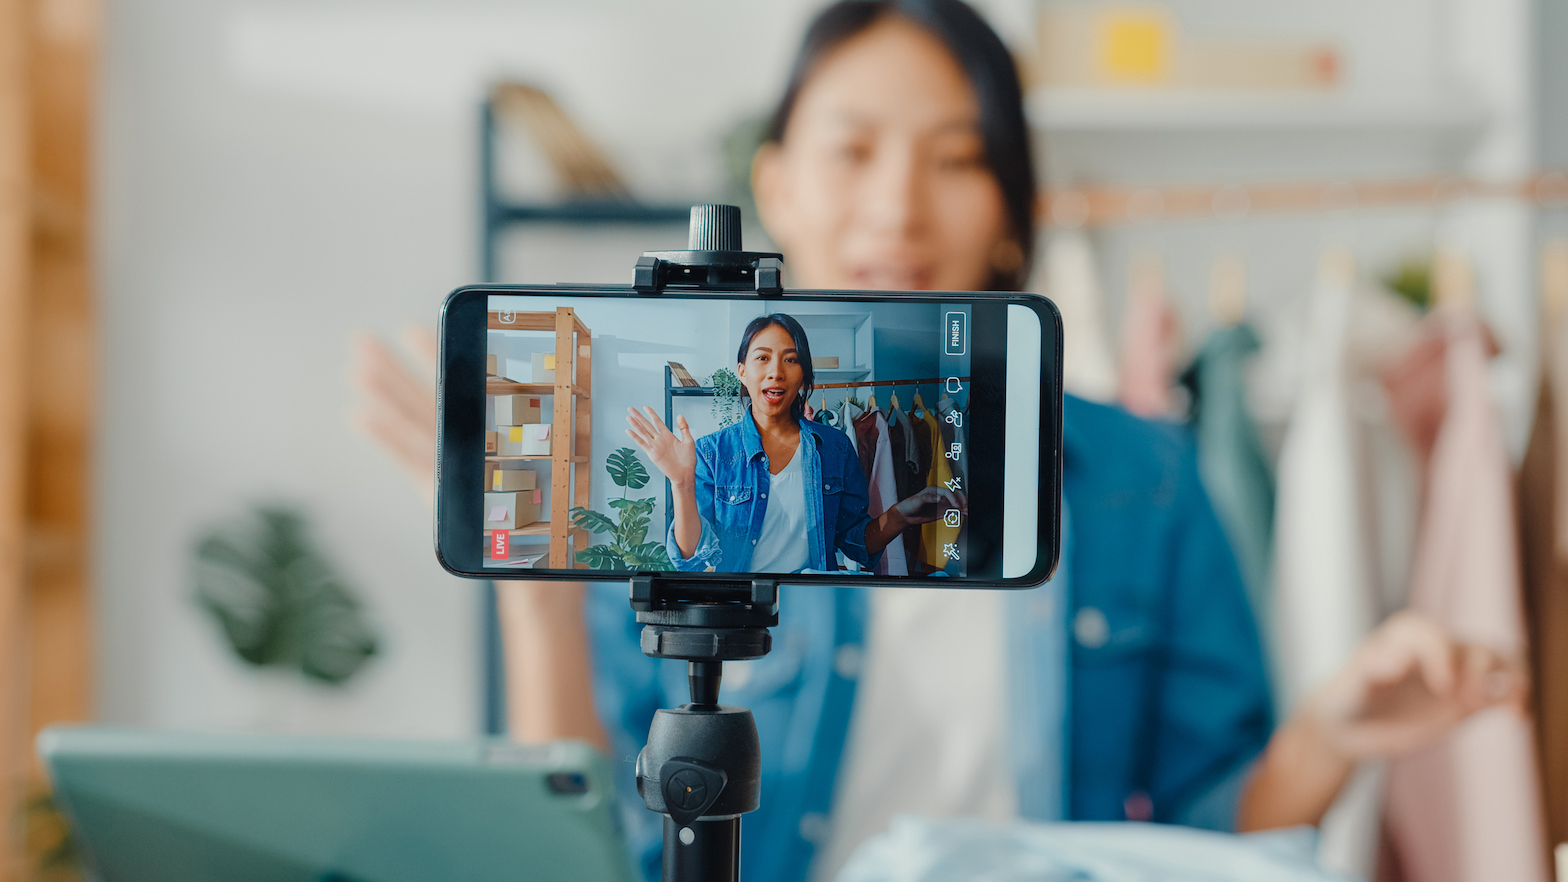 5 Reasons Your Sales Team Needs Video